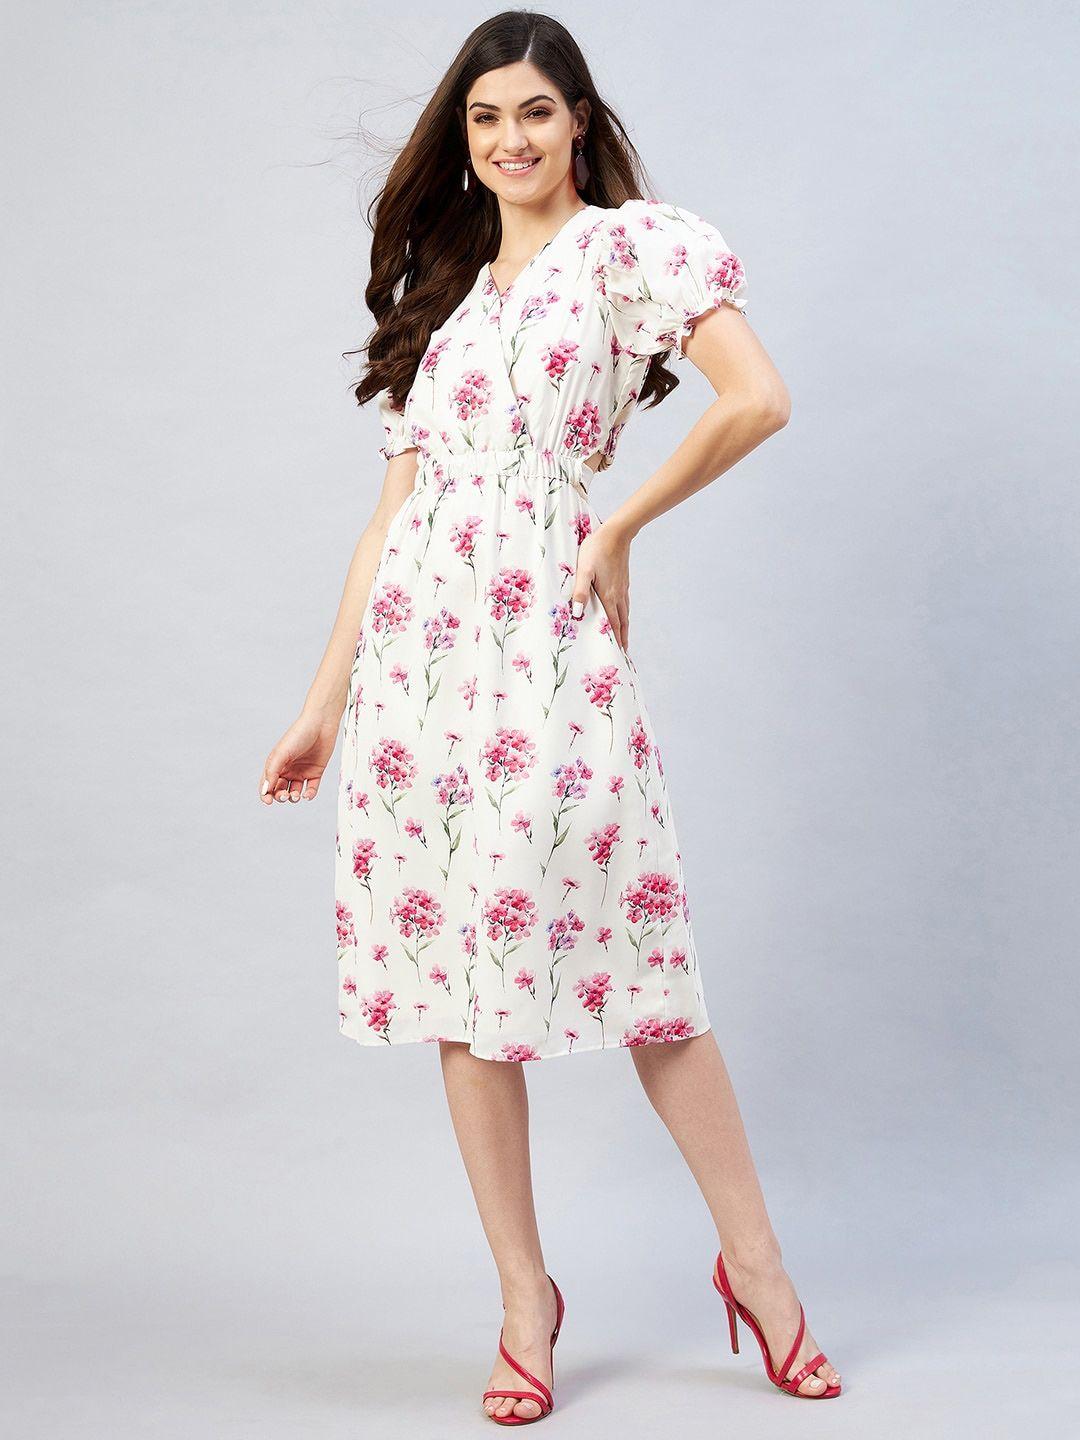 marie claire off white floral crepe a-line dress